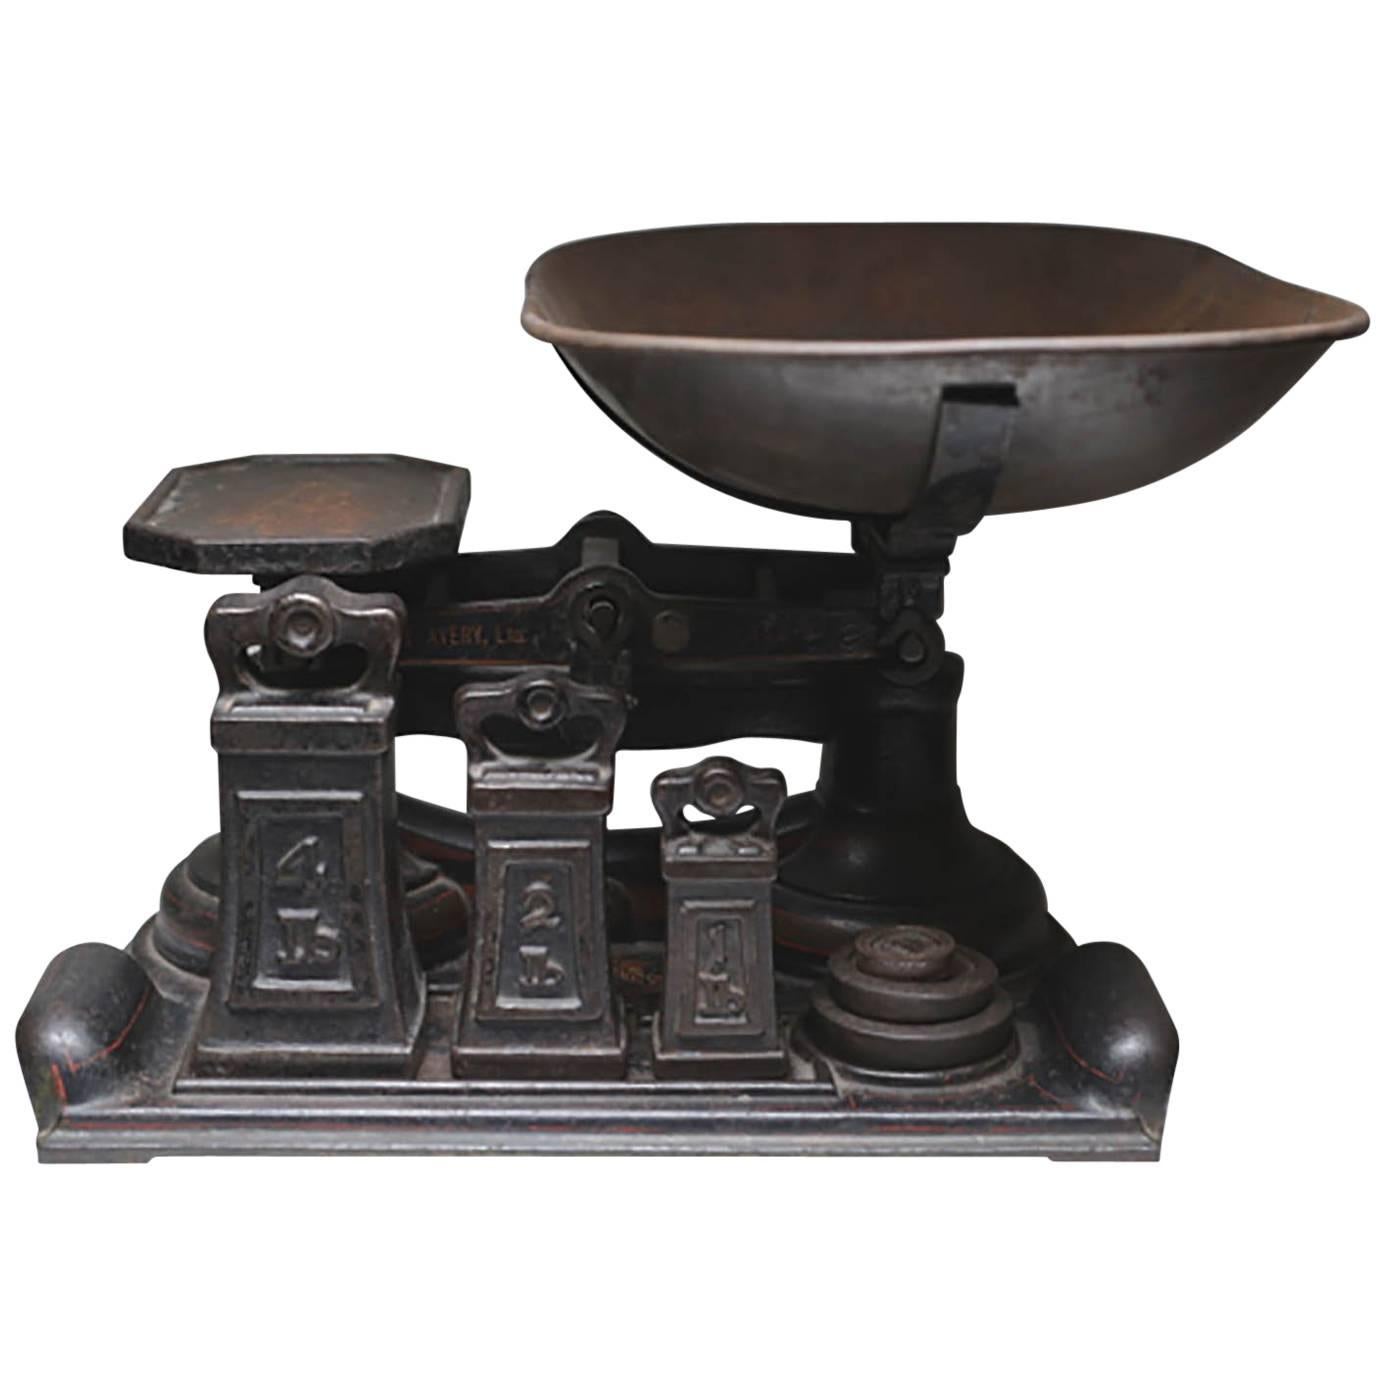 19th Century Cast Iron "W. & T. Avery Ltd Class Scale and Weights, circa 1880s